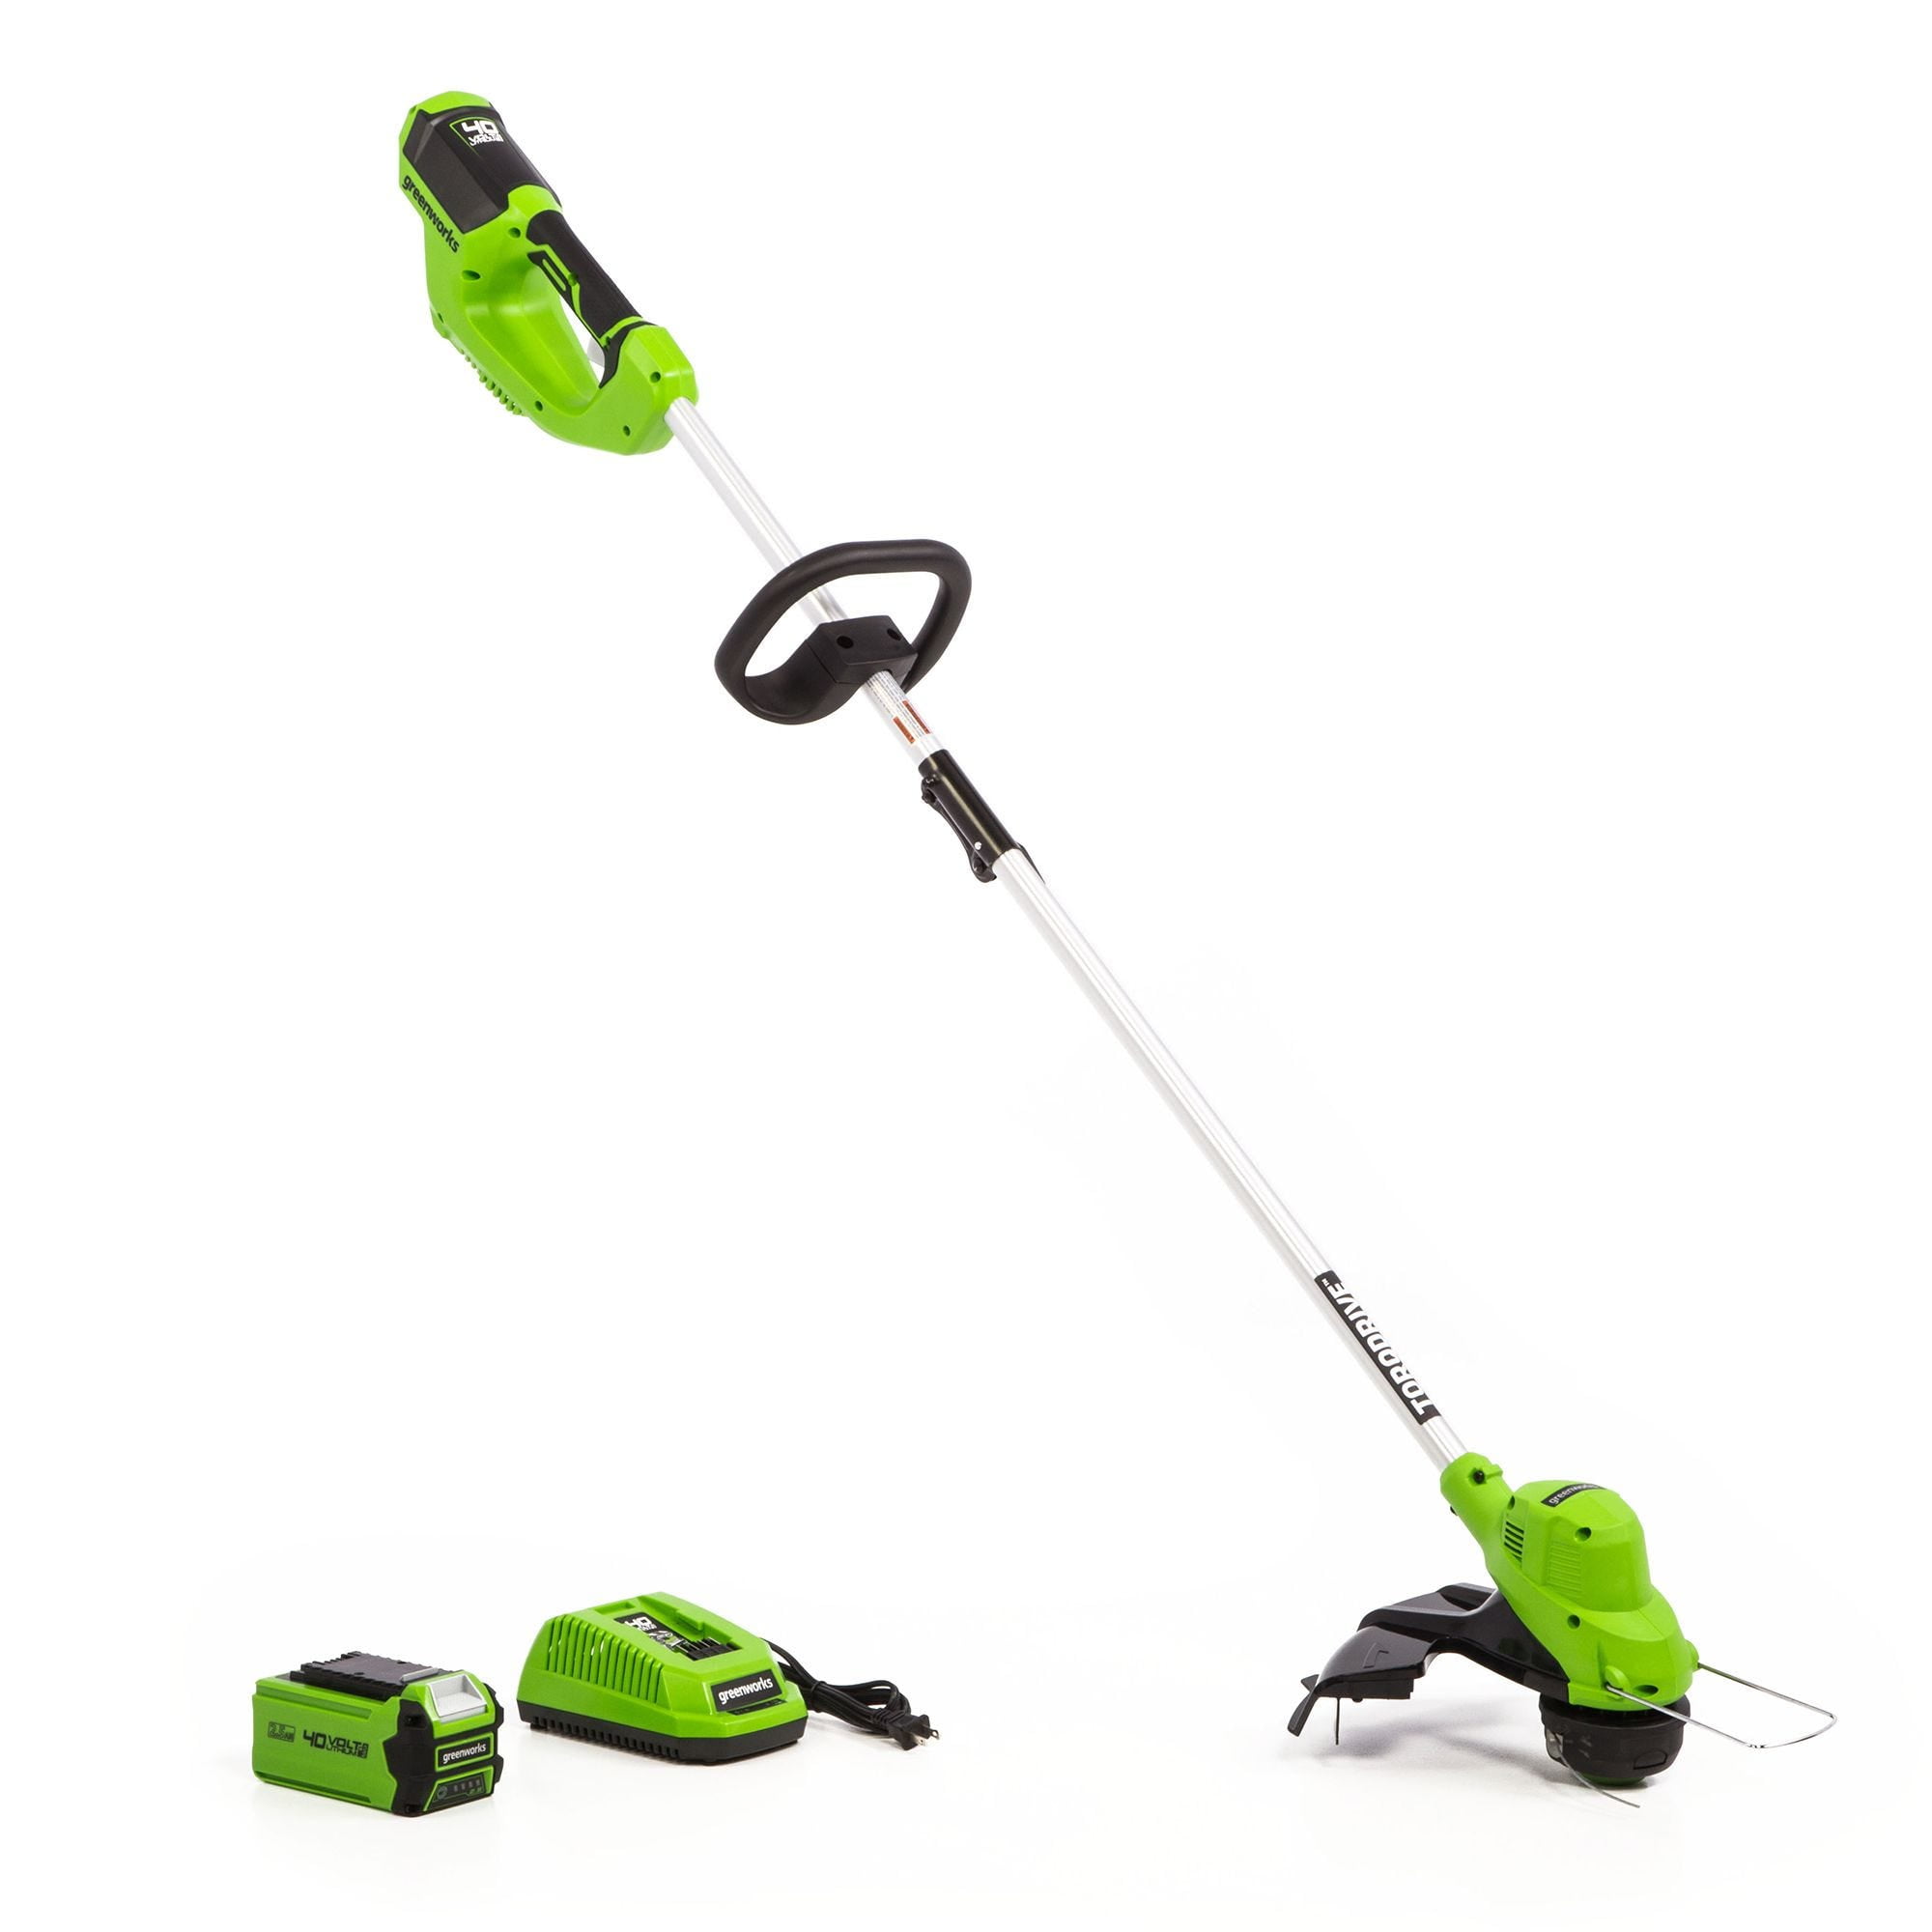 How To Change The String On A Greenworks Weed Eater Greenworks 15 inch 40 Volt Straight Shaft String Trimmer with 2.5 Ah  Battery and Charger, 2111802 - Walmart.com